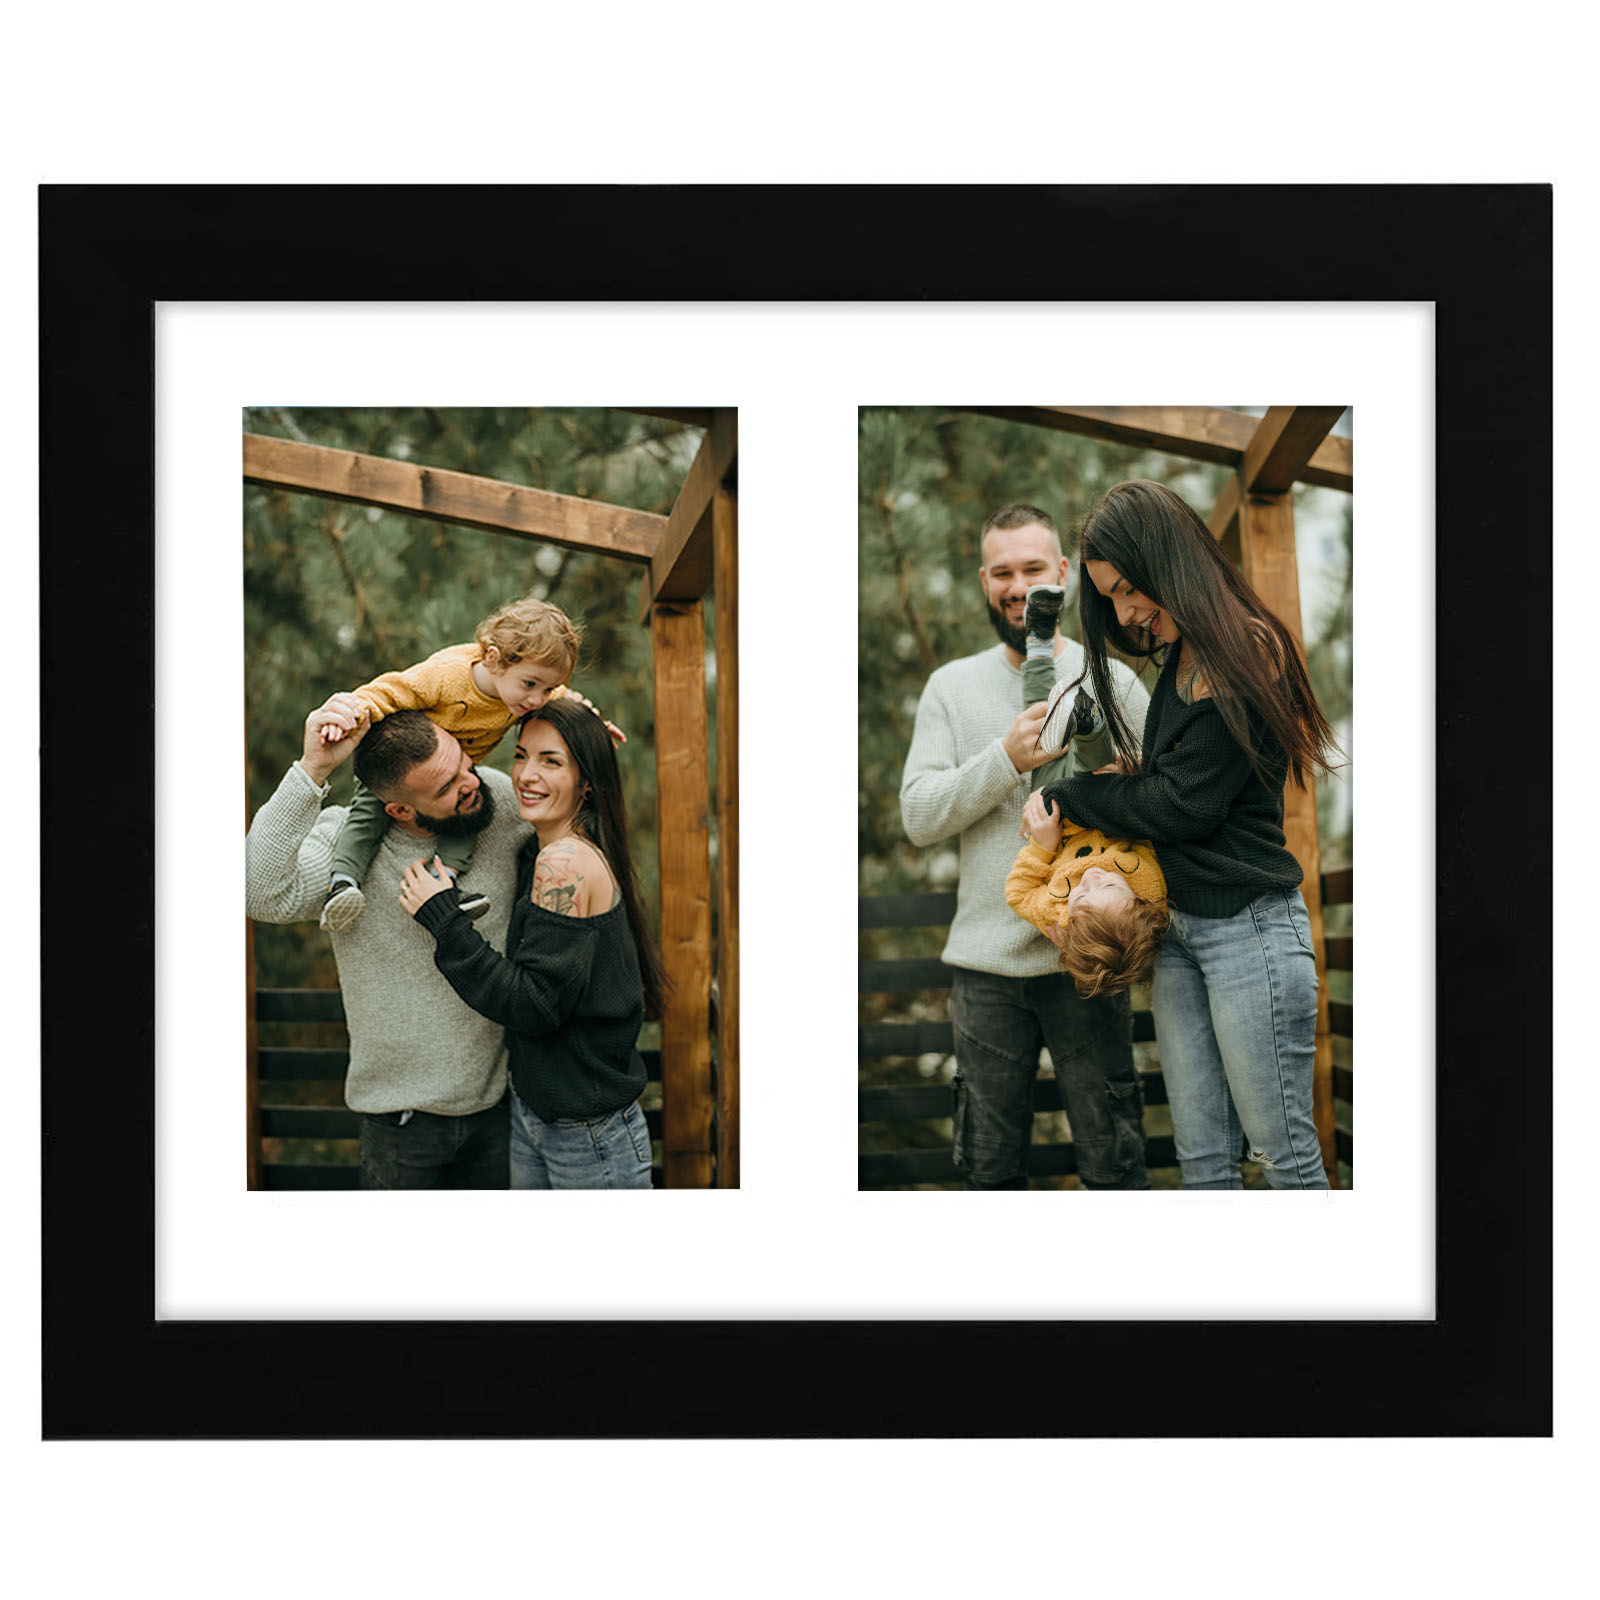 Printed Photo Collage Personalized Family 4x6 Tabletop Frame - Horizontal